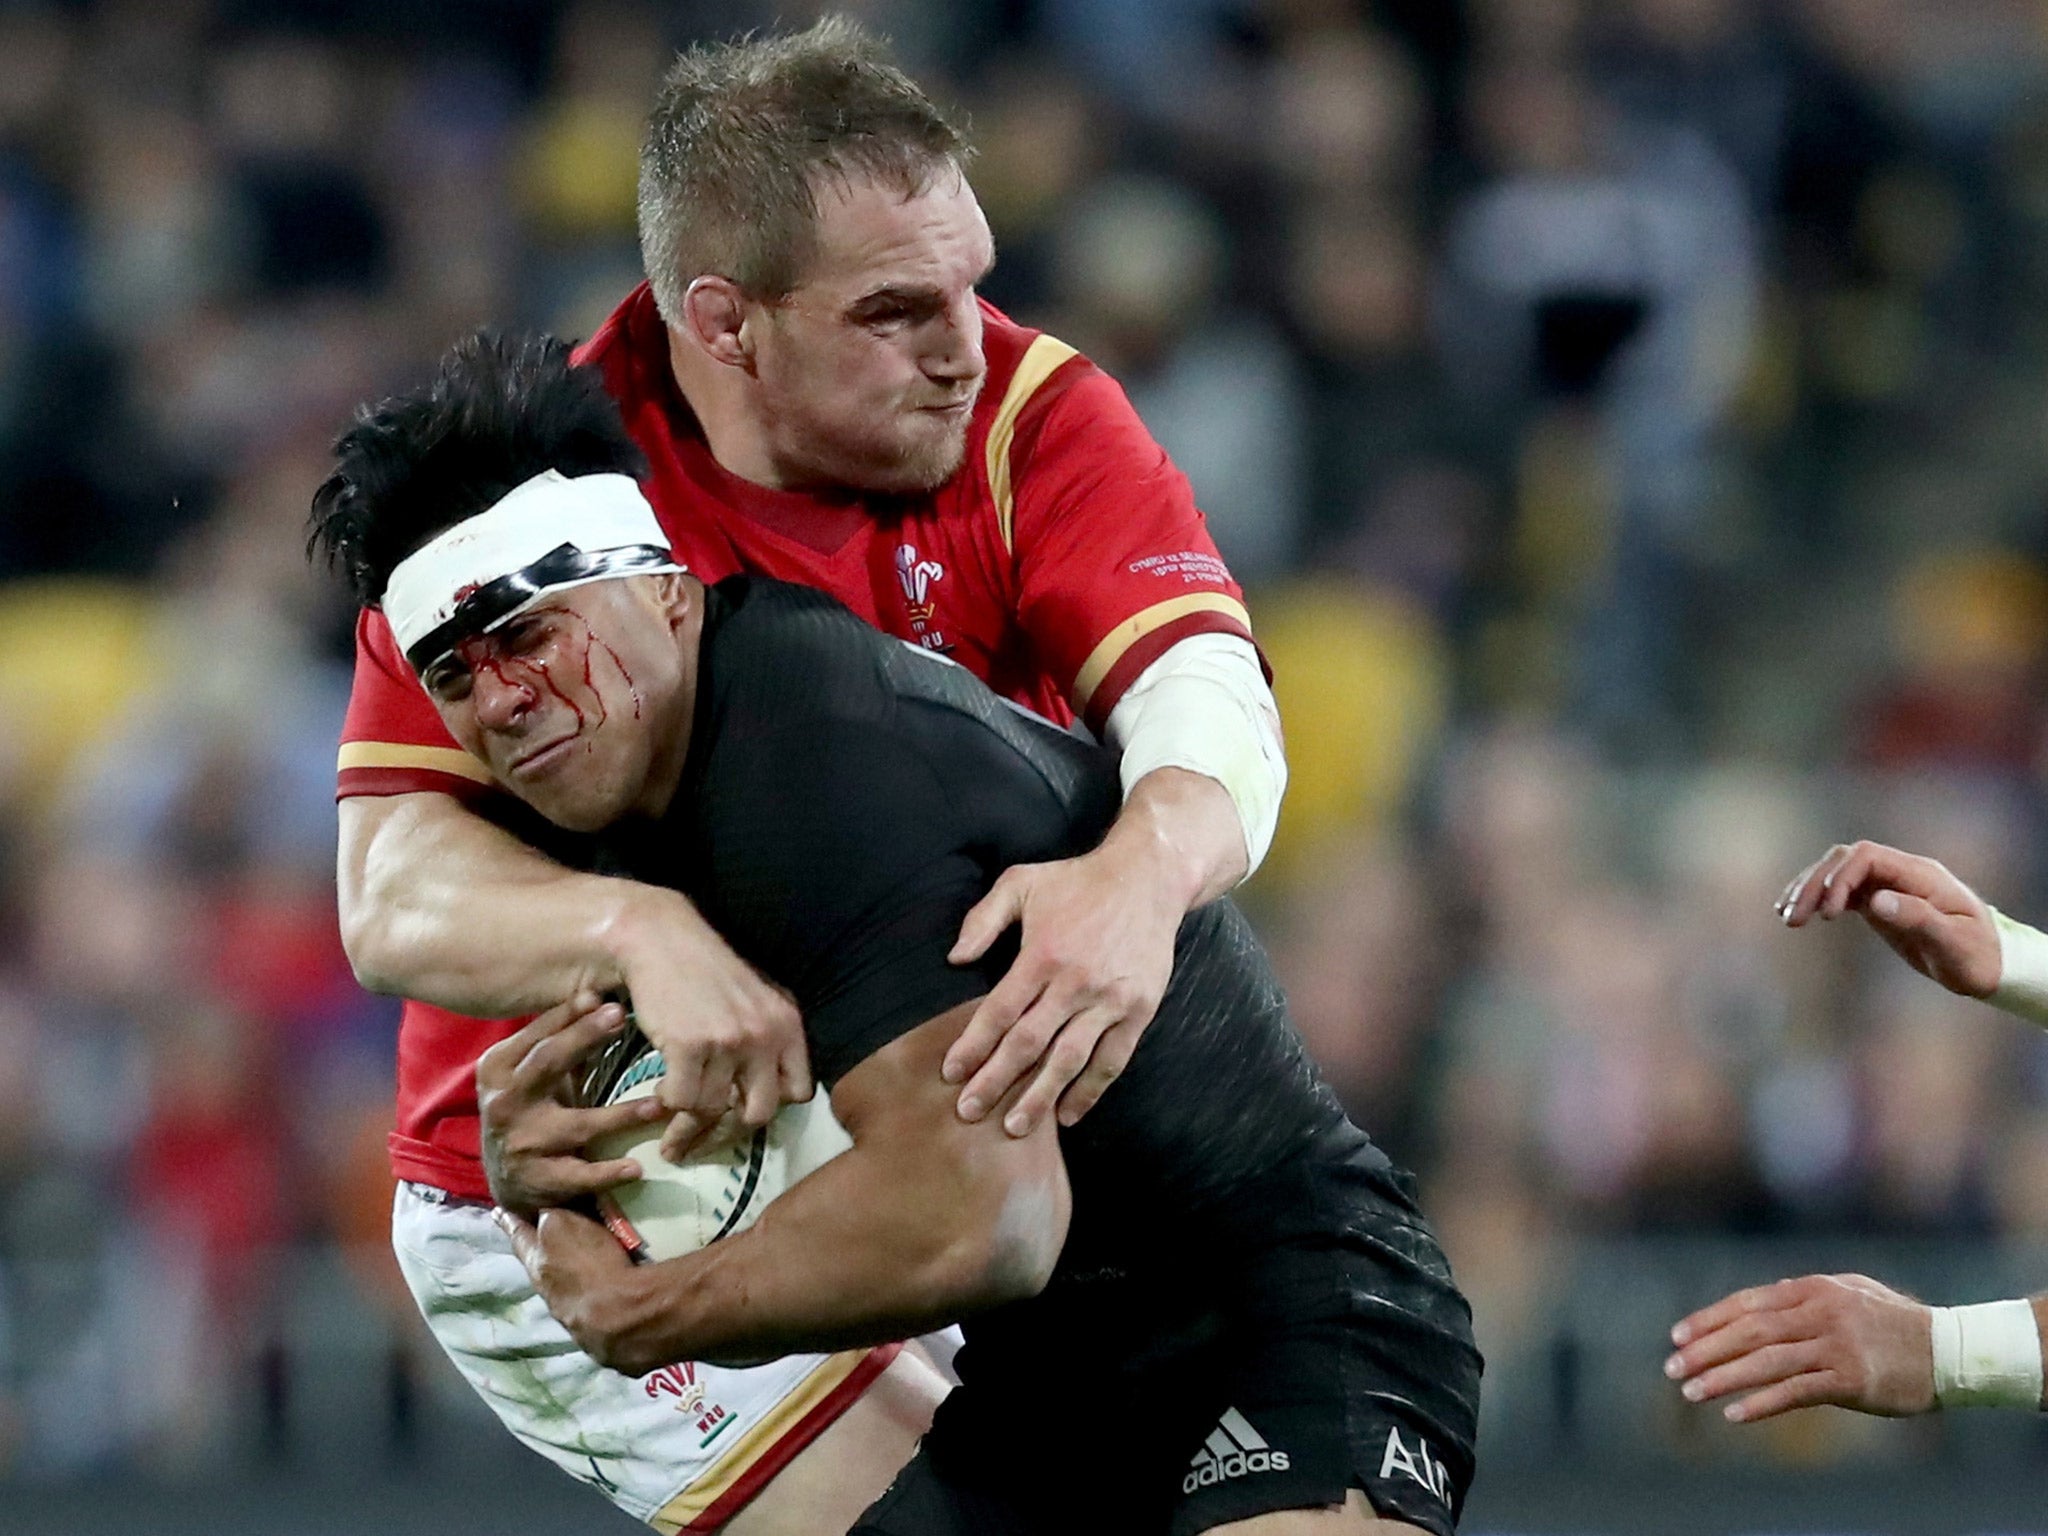 Gethin Jenkins has flown home from New Zealand after being ruled out of the third Test